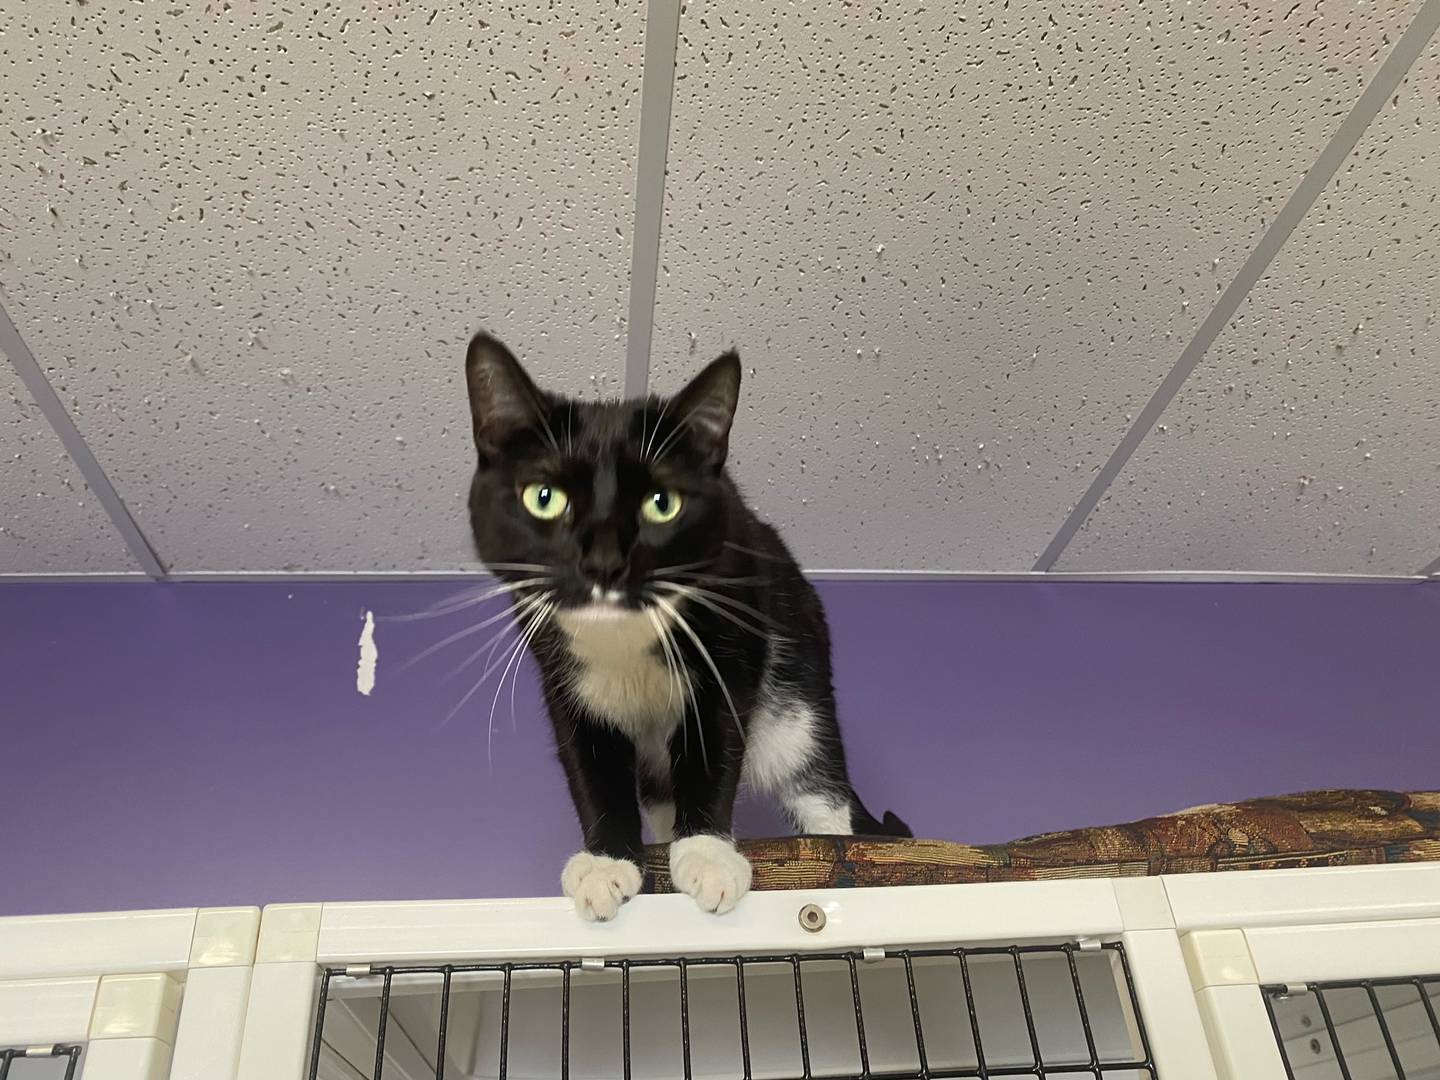 Mazie is a 3-year-old black and white tuxedo. She is affectionate and sweet. Mazie loves playing with her toys and does well around other cats. For information on Mazie, including adoption fees please visit justanimals.org or call 815-448-2510.